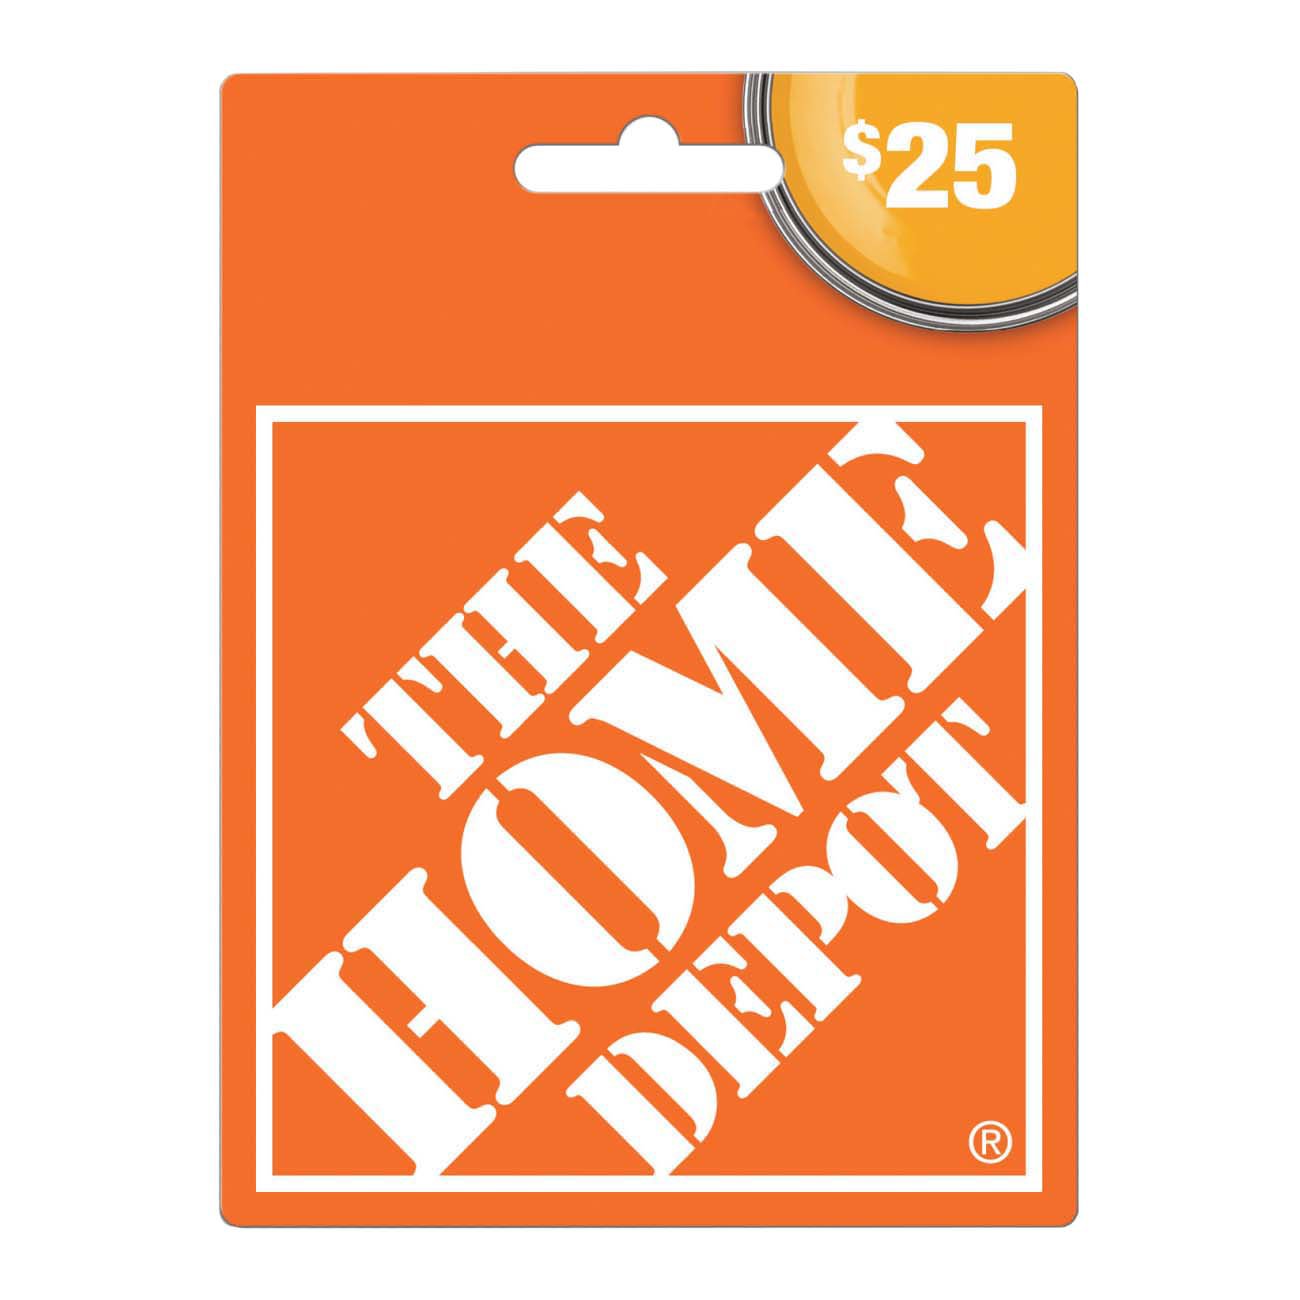 The Home Depot 25 Gift Card Shop Specialty Gift Cards At H E B